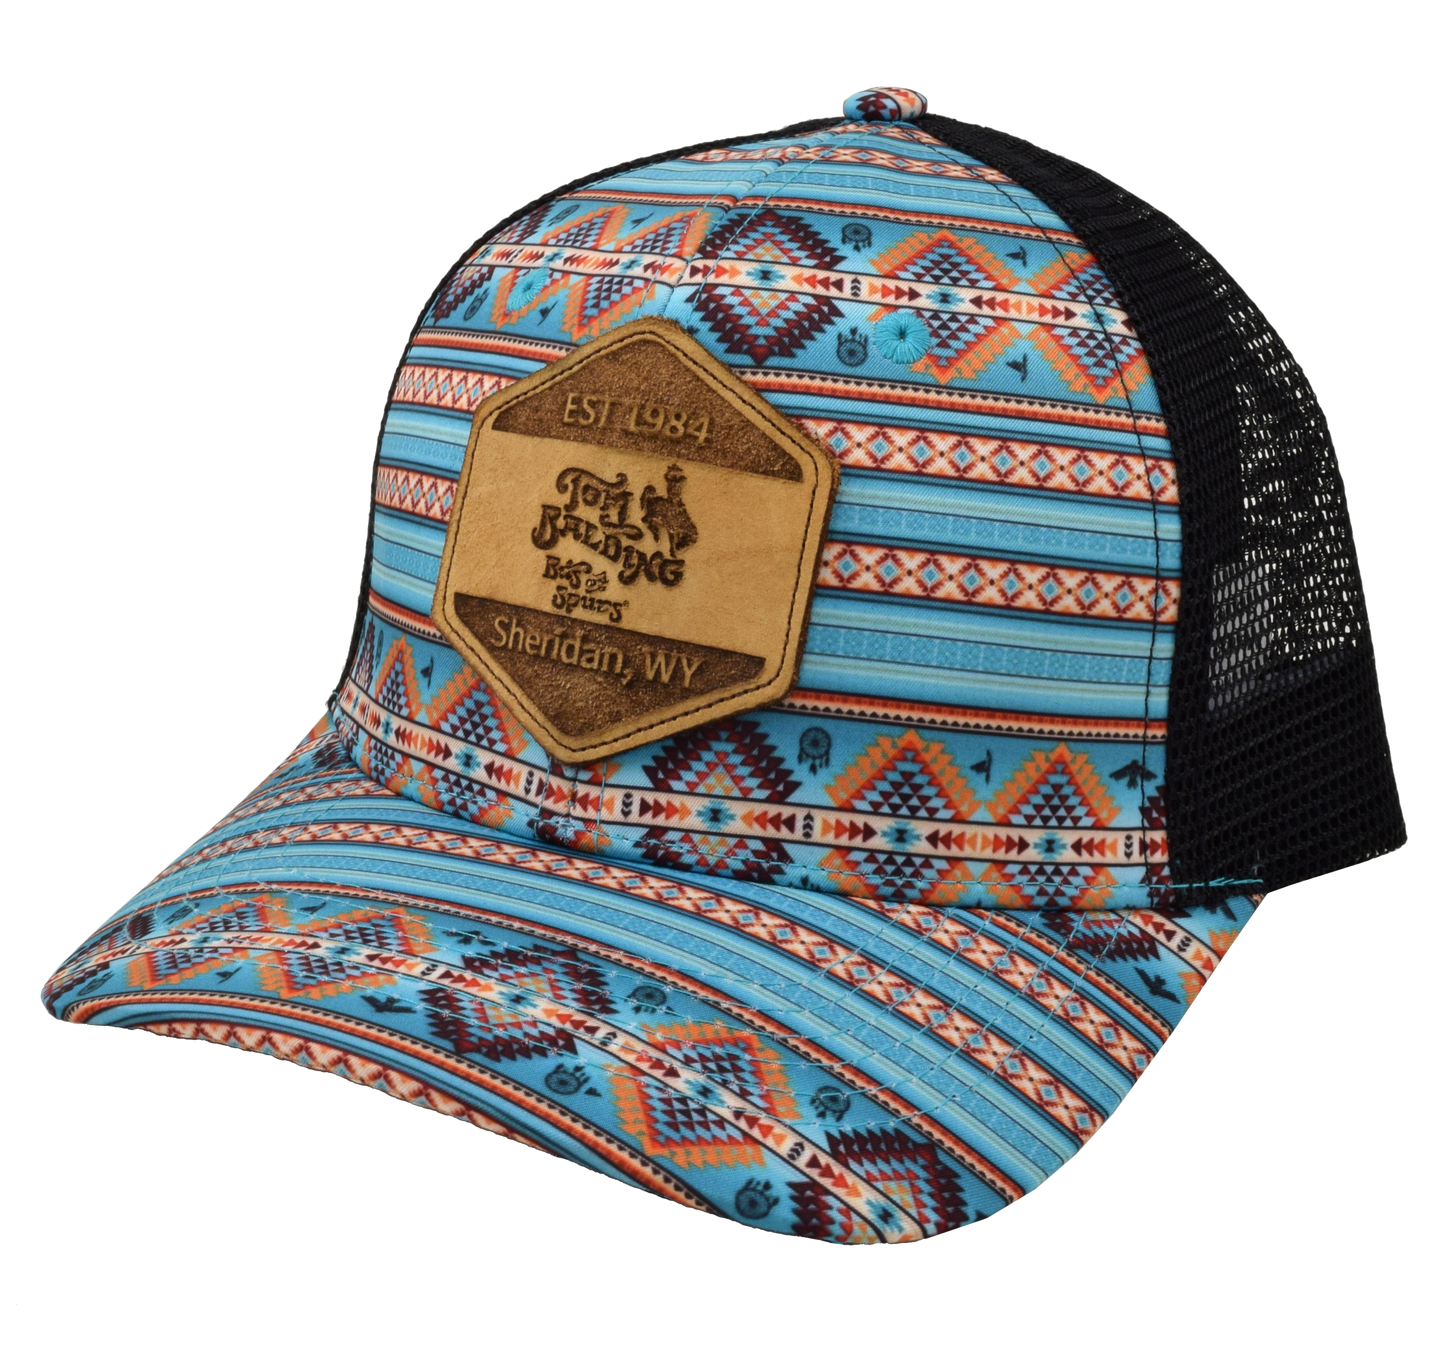 Cap #10 Leather Patch Multi Color Pattern with Black Mesh Back Classic Cap